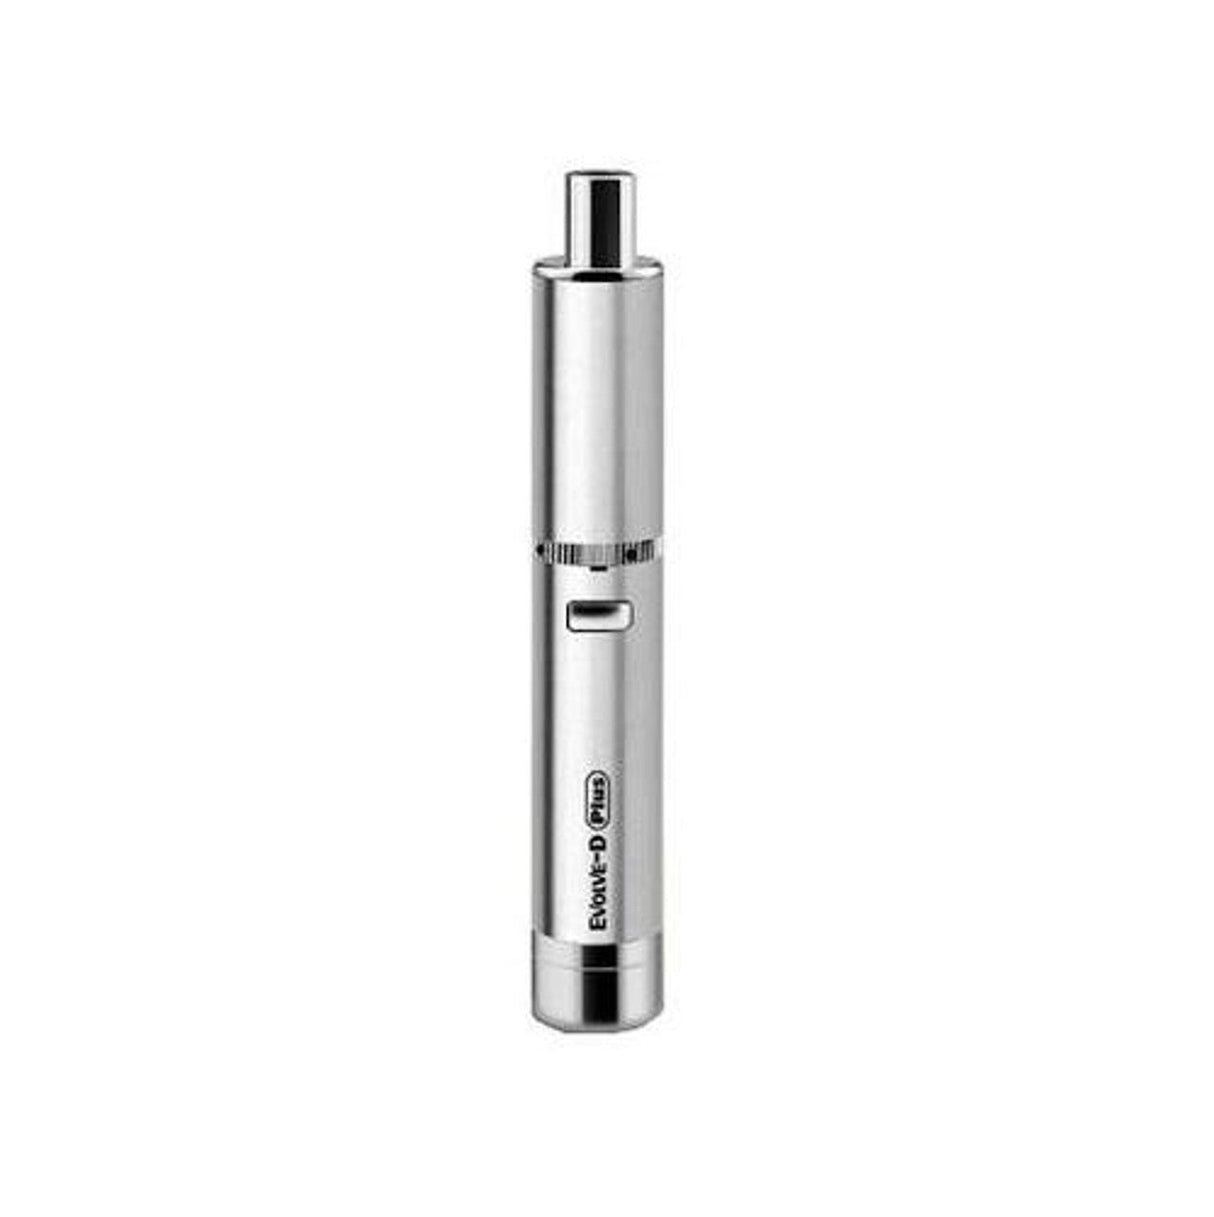 Yocan Evolve-D Plus Portable Dry Herb Vaporizer in Silver, 1100mAh Battery, Front View